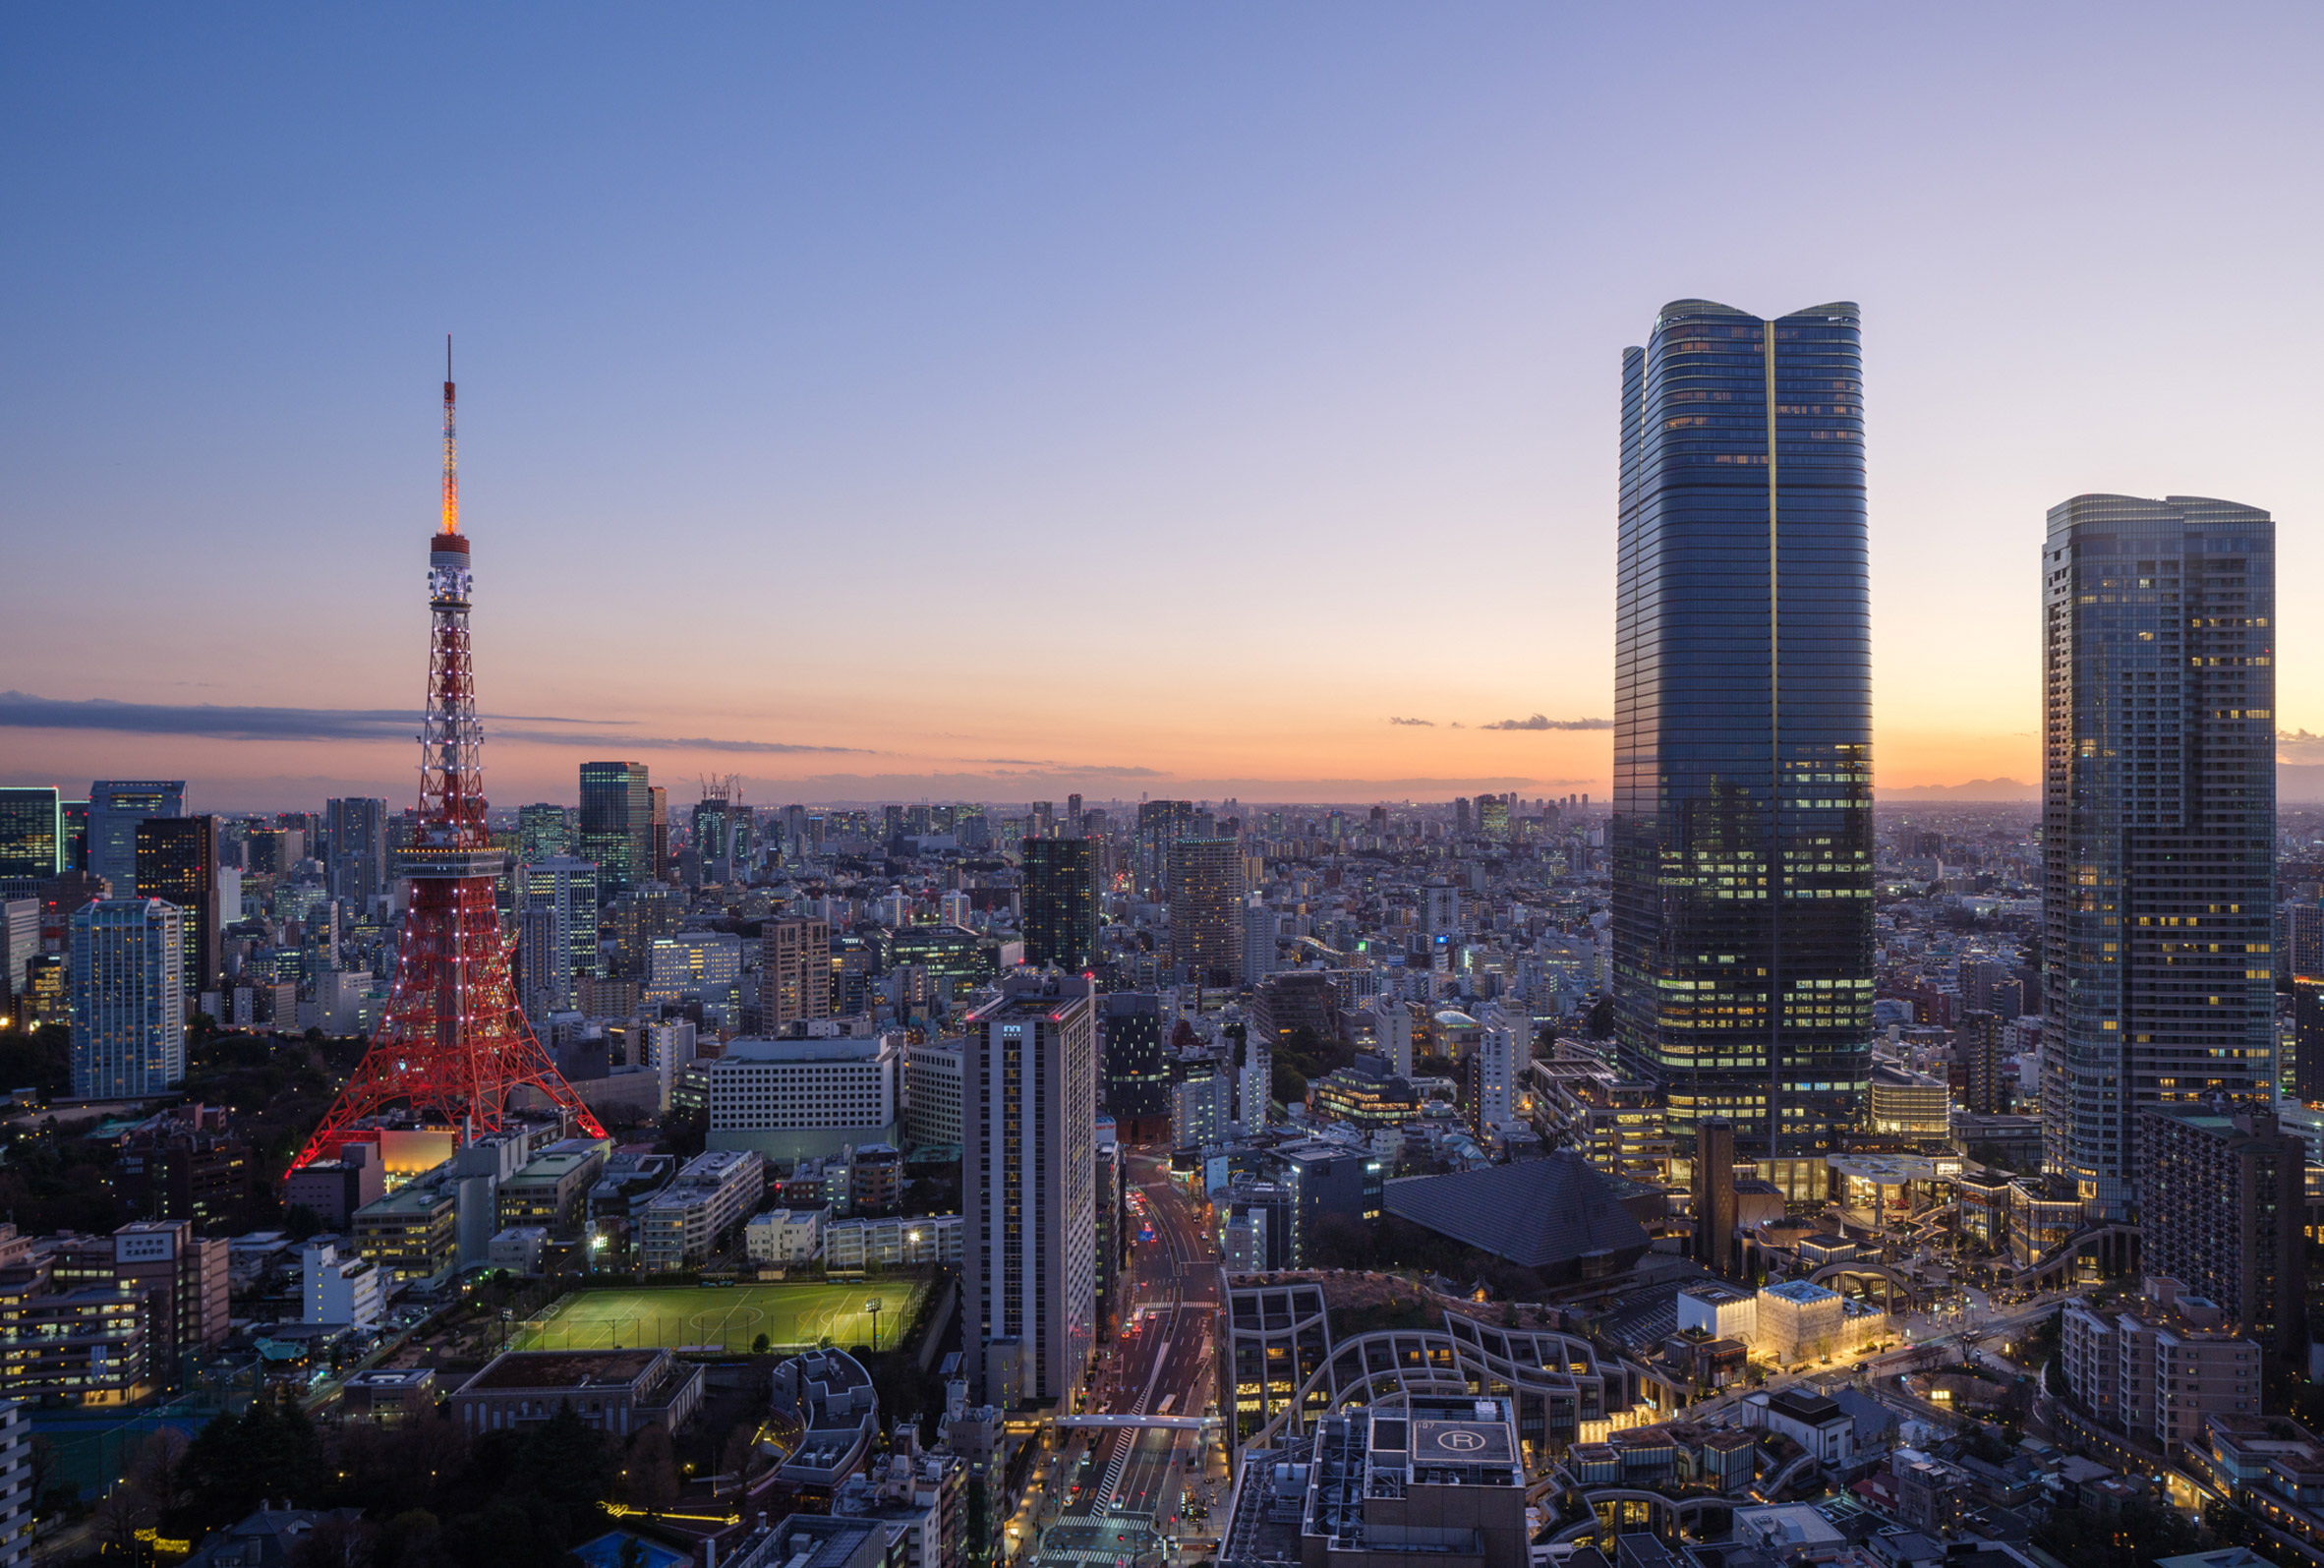 Japan's tallest building A District tops out in Tokyo